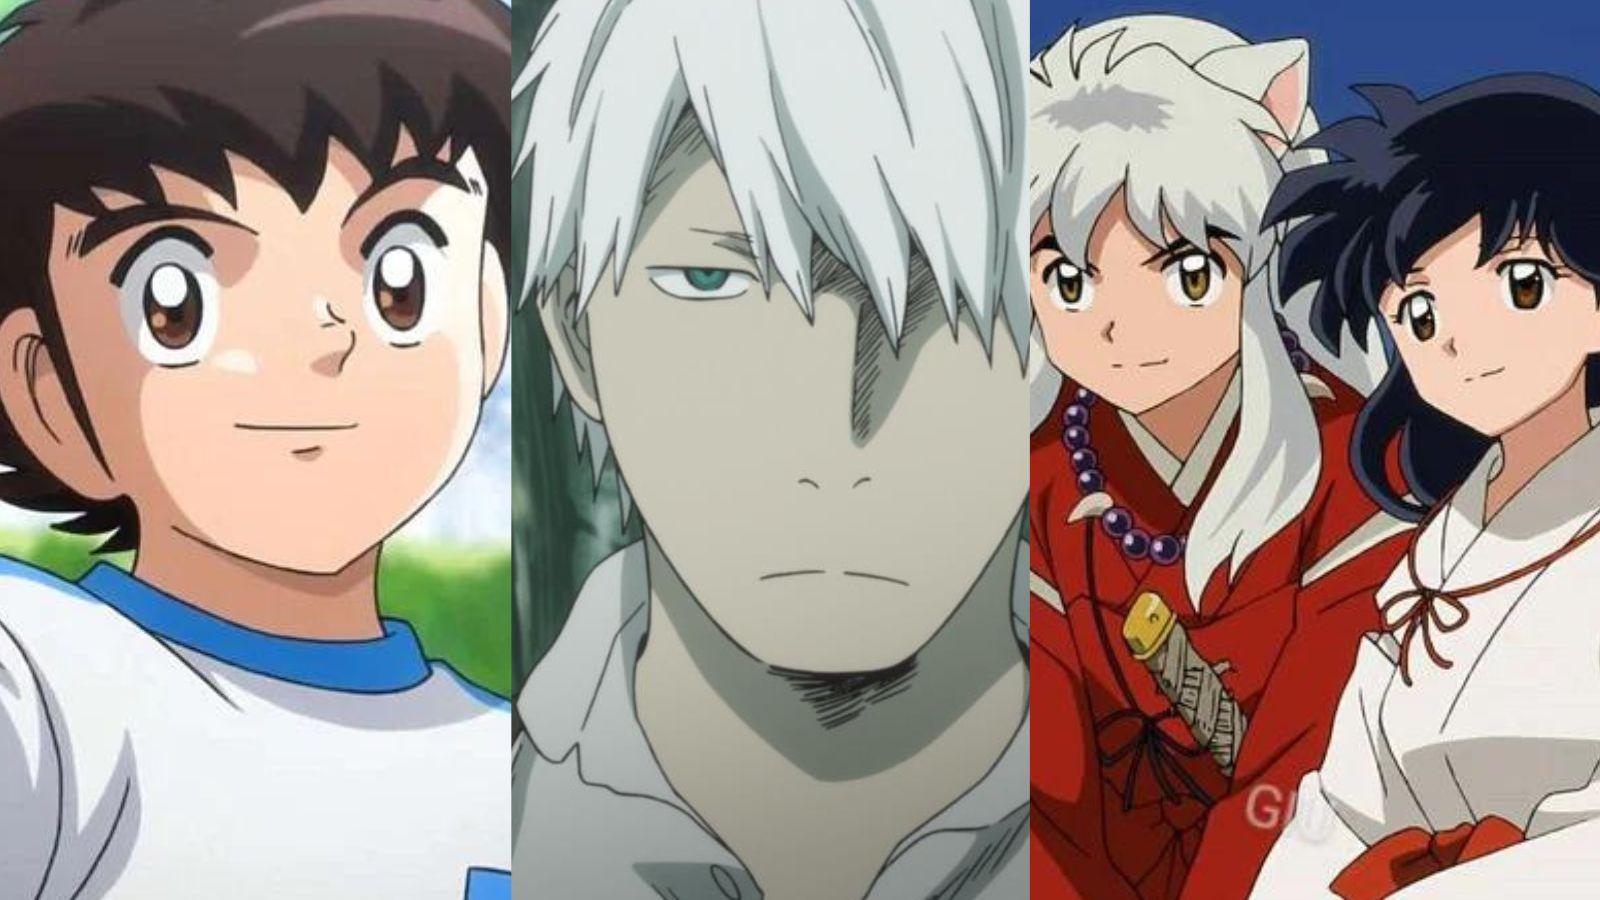 10 best anime you should be watching this Christmas - Dexerto